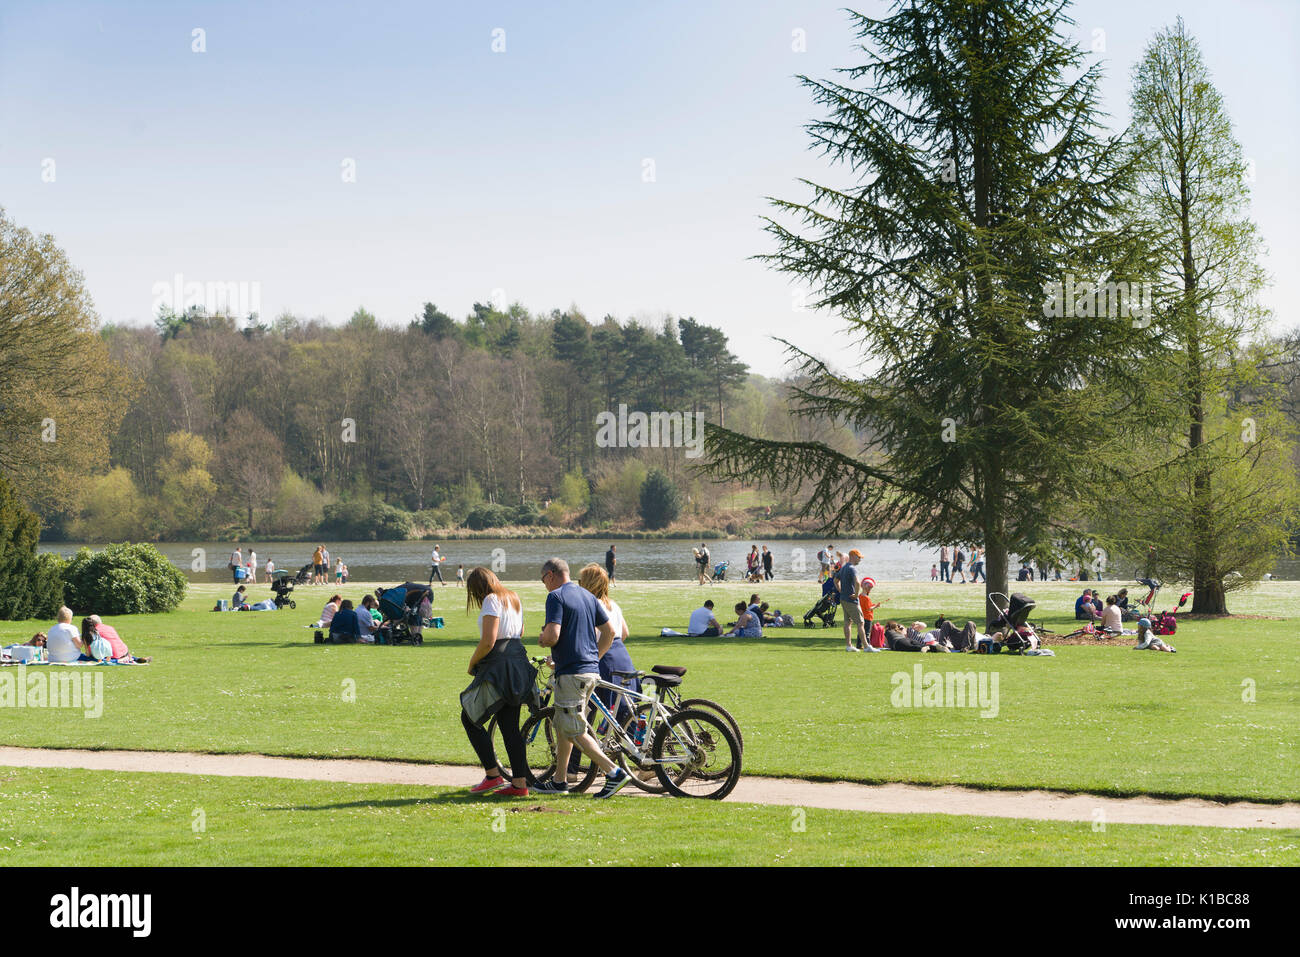 England, Nottinghamshire - Clumber Park, National Trust large estate open to public. The lake, and visitors including cyclists. Stock Photo